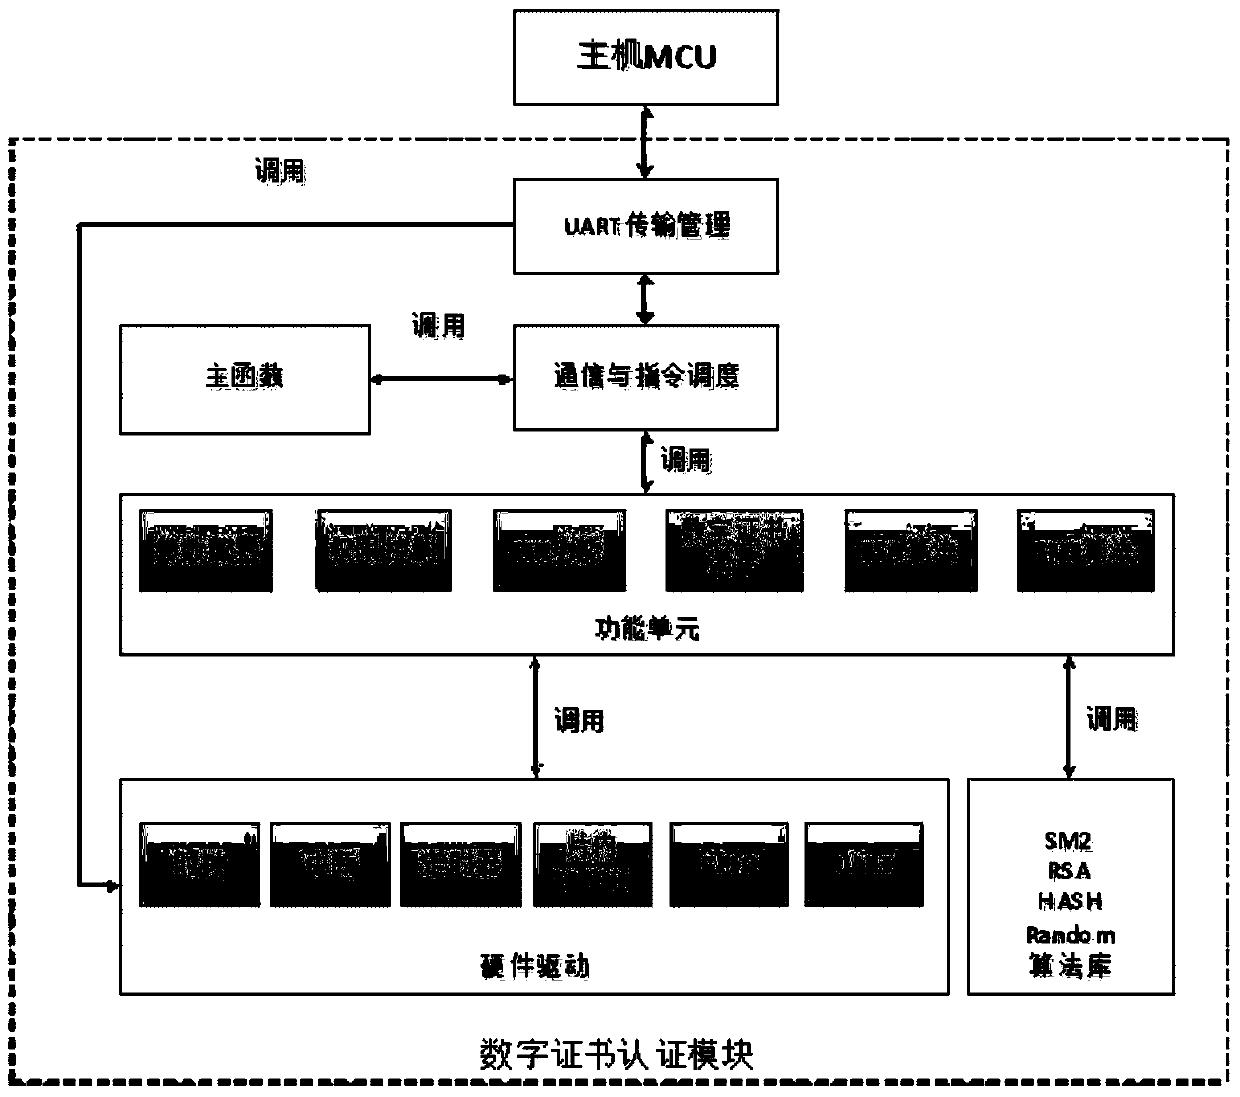 Digital certificate authentication device and digital certificate authentication system